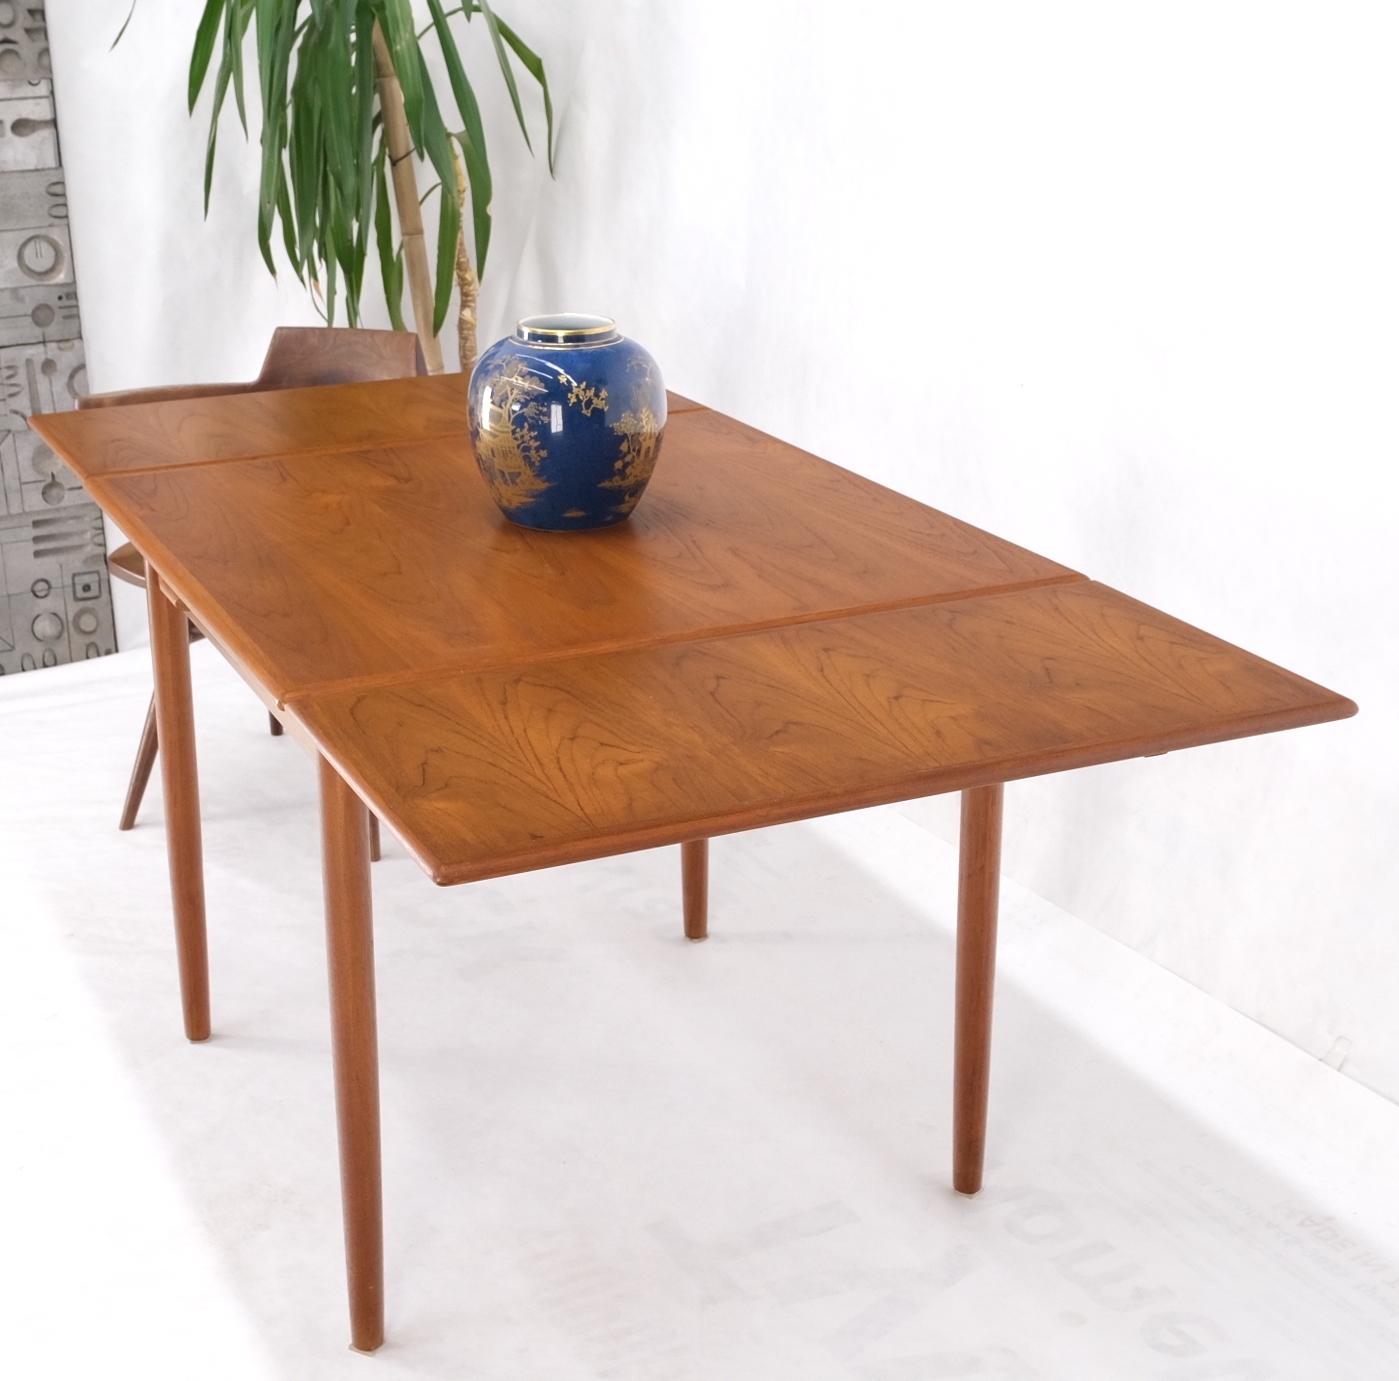 Danish Mid-Century Modern Square Teak Refectory Extension Boards Dining Table In Good Condition For Sale In Rockaway, NJ